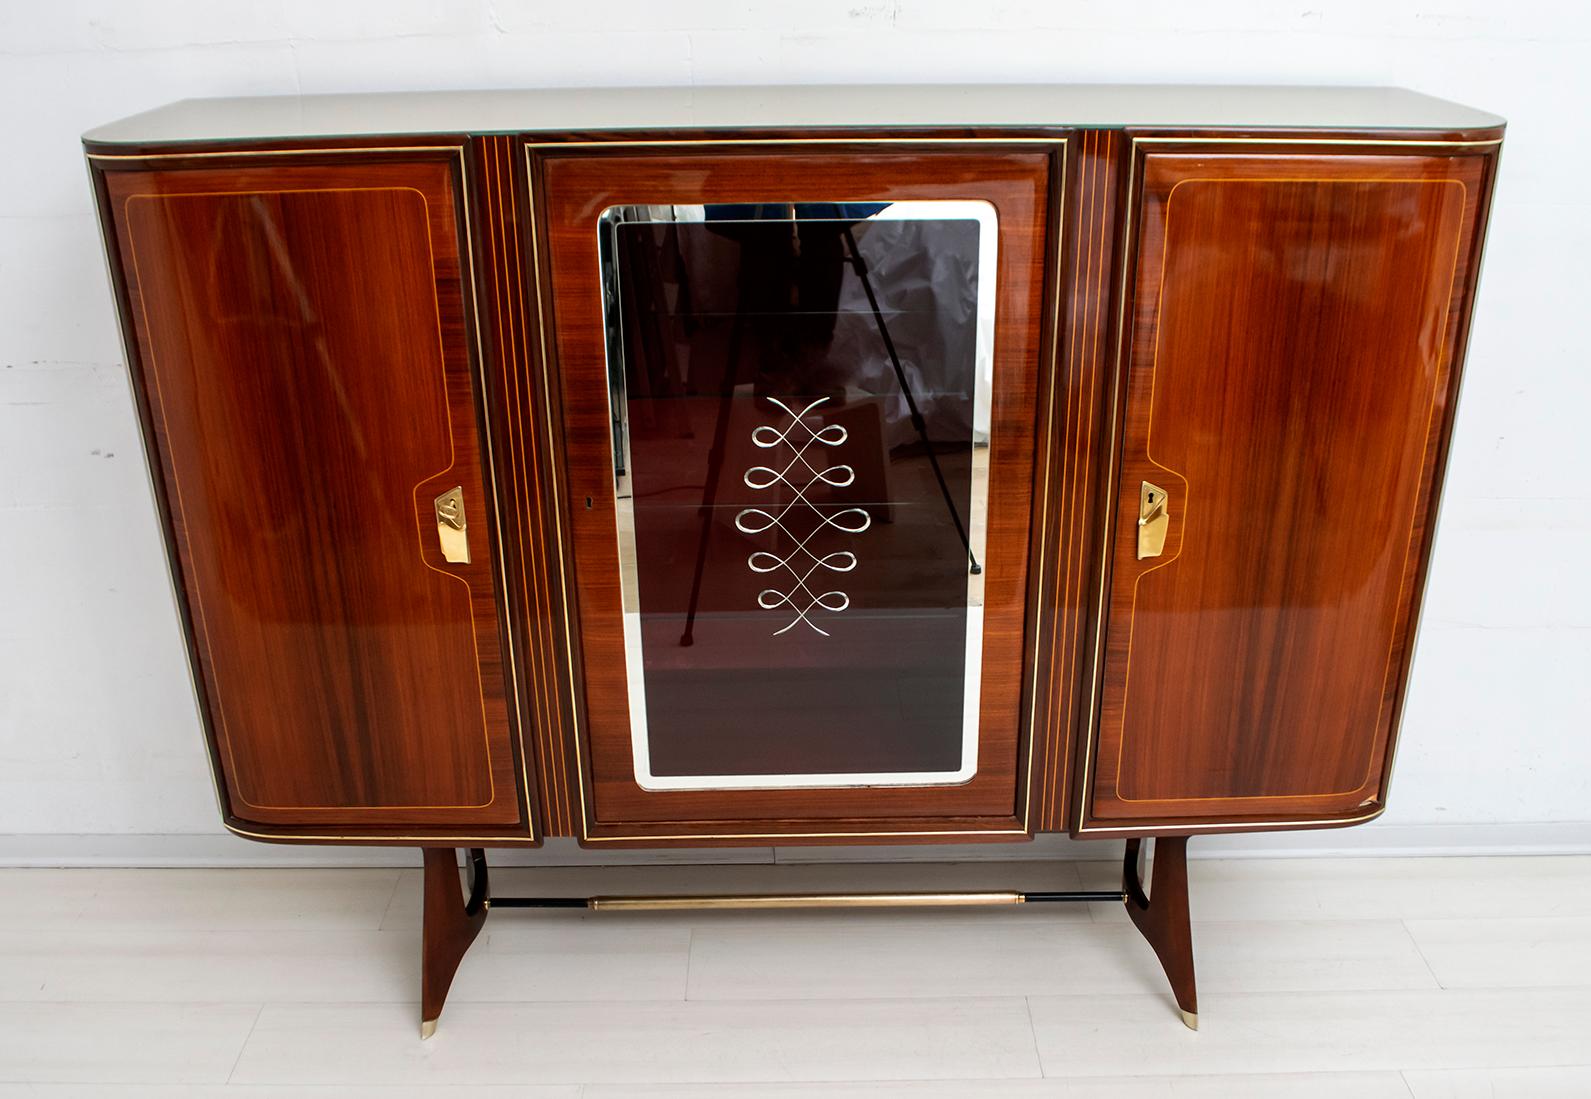 Attributed Gio Ponti Mid-Century Italian Mahogany and Brass Bar Cabinet, 1950s For Sale 4